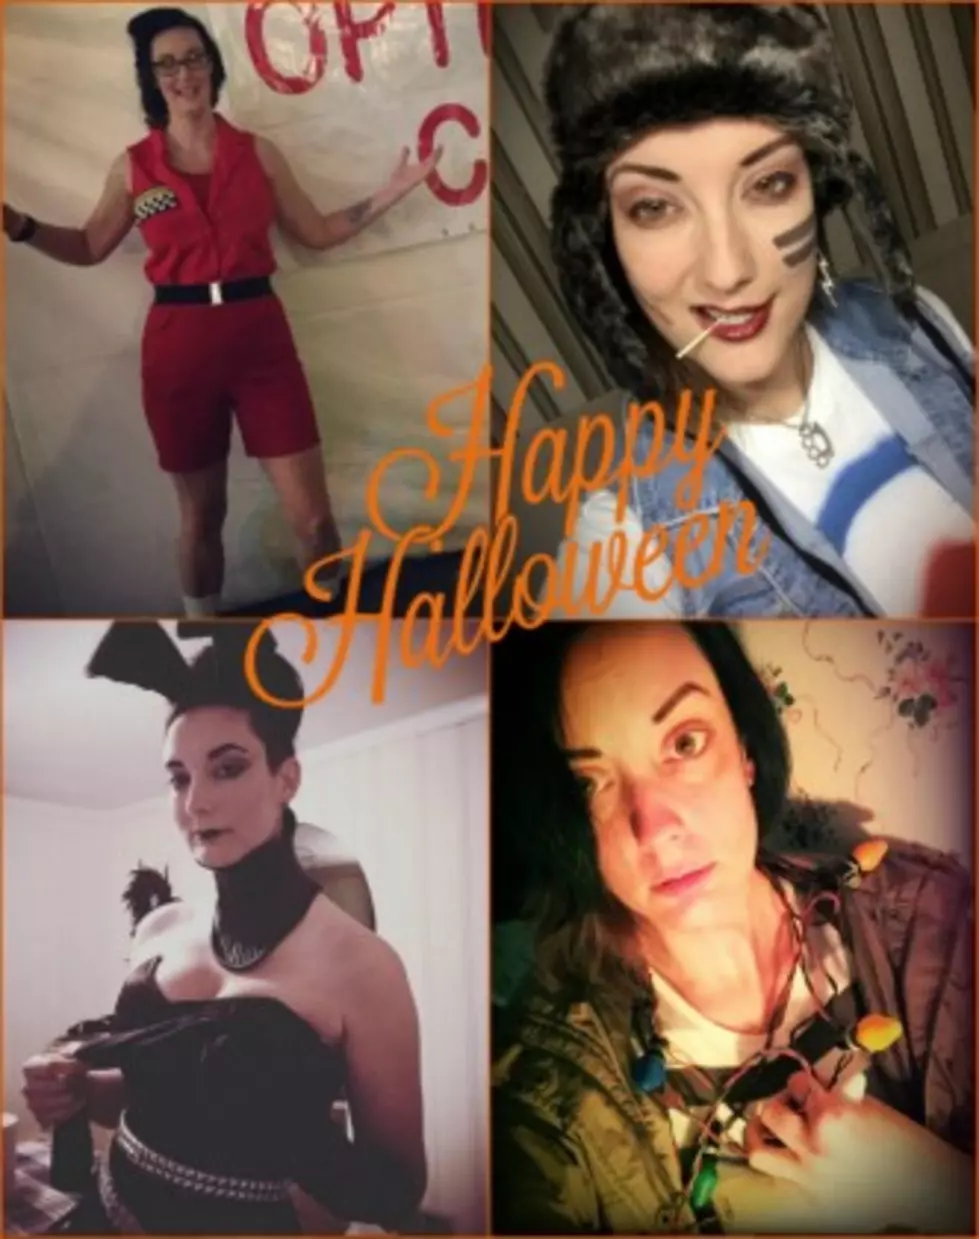 More Than One Halloween Costume — I Take This Seriously, People [PHOTOS]